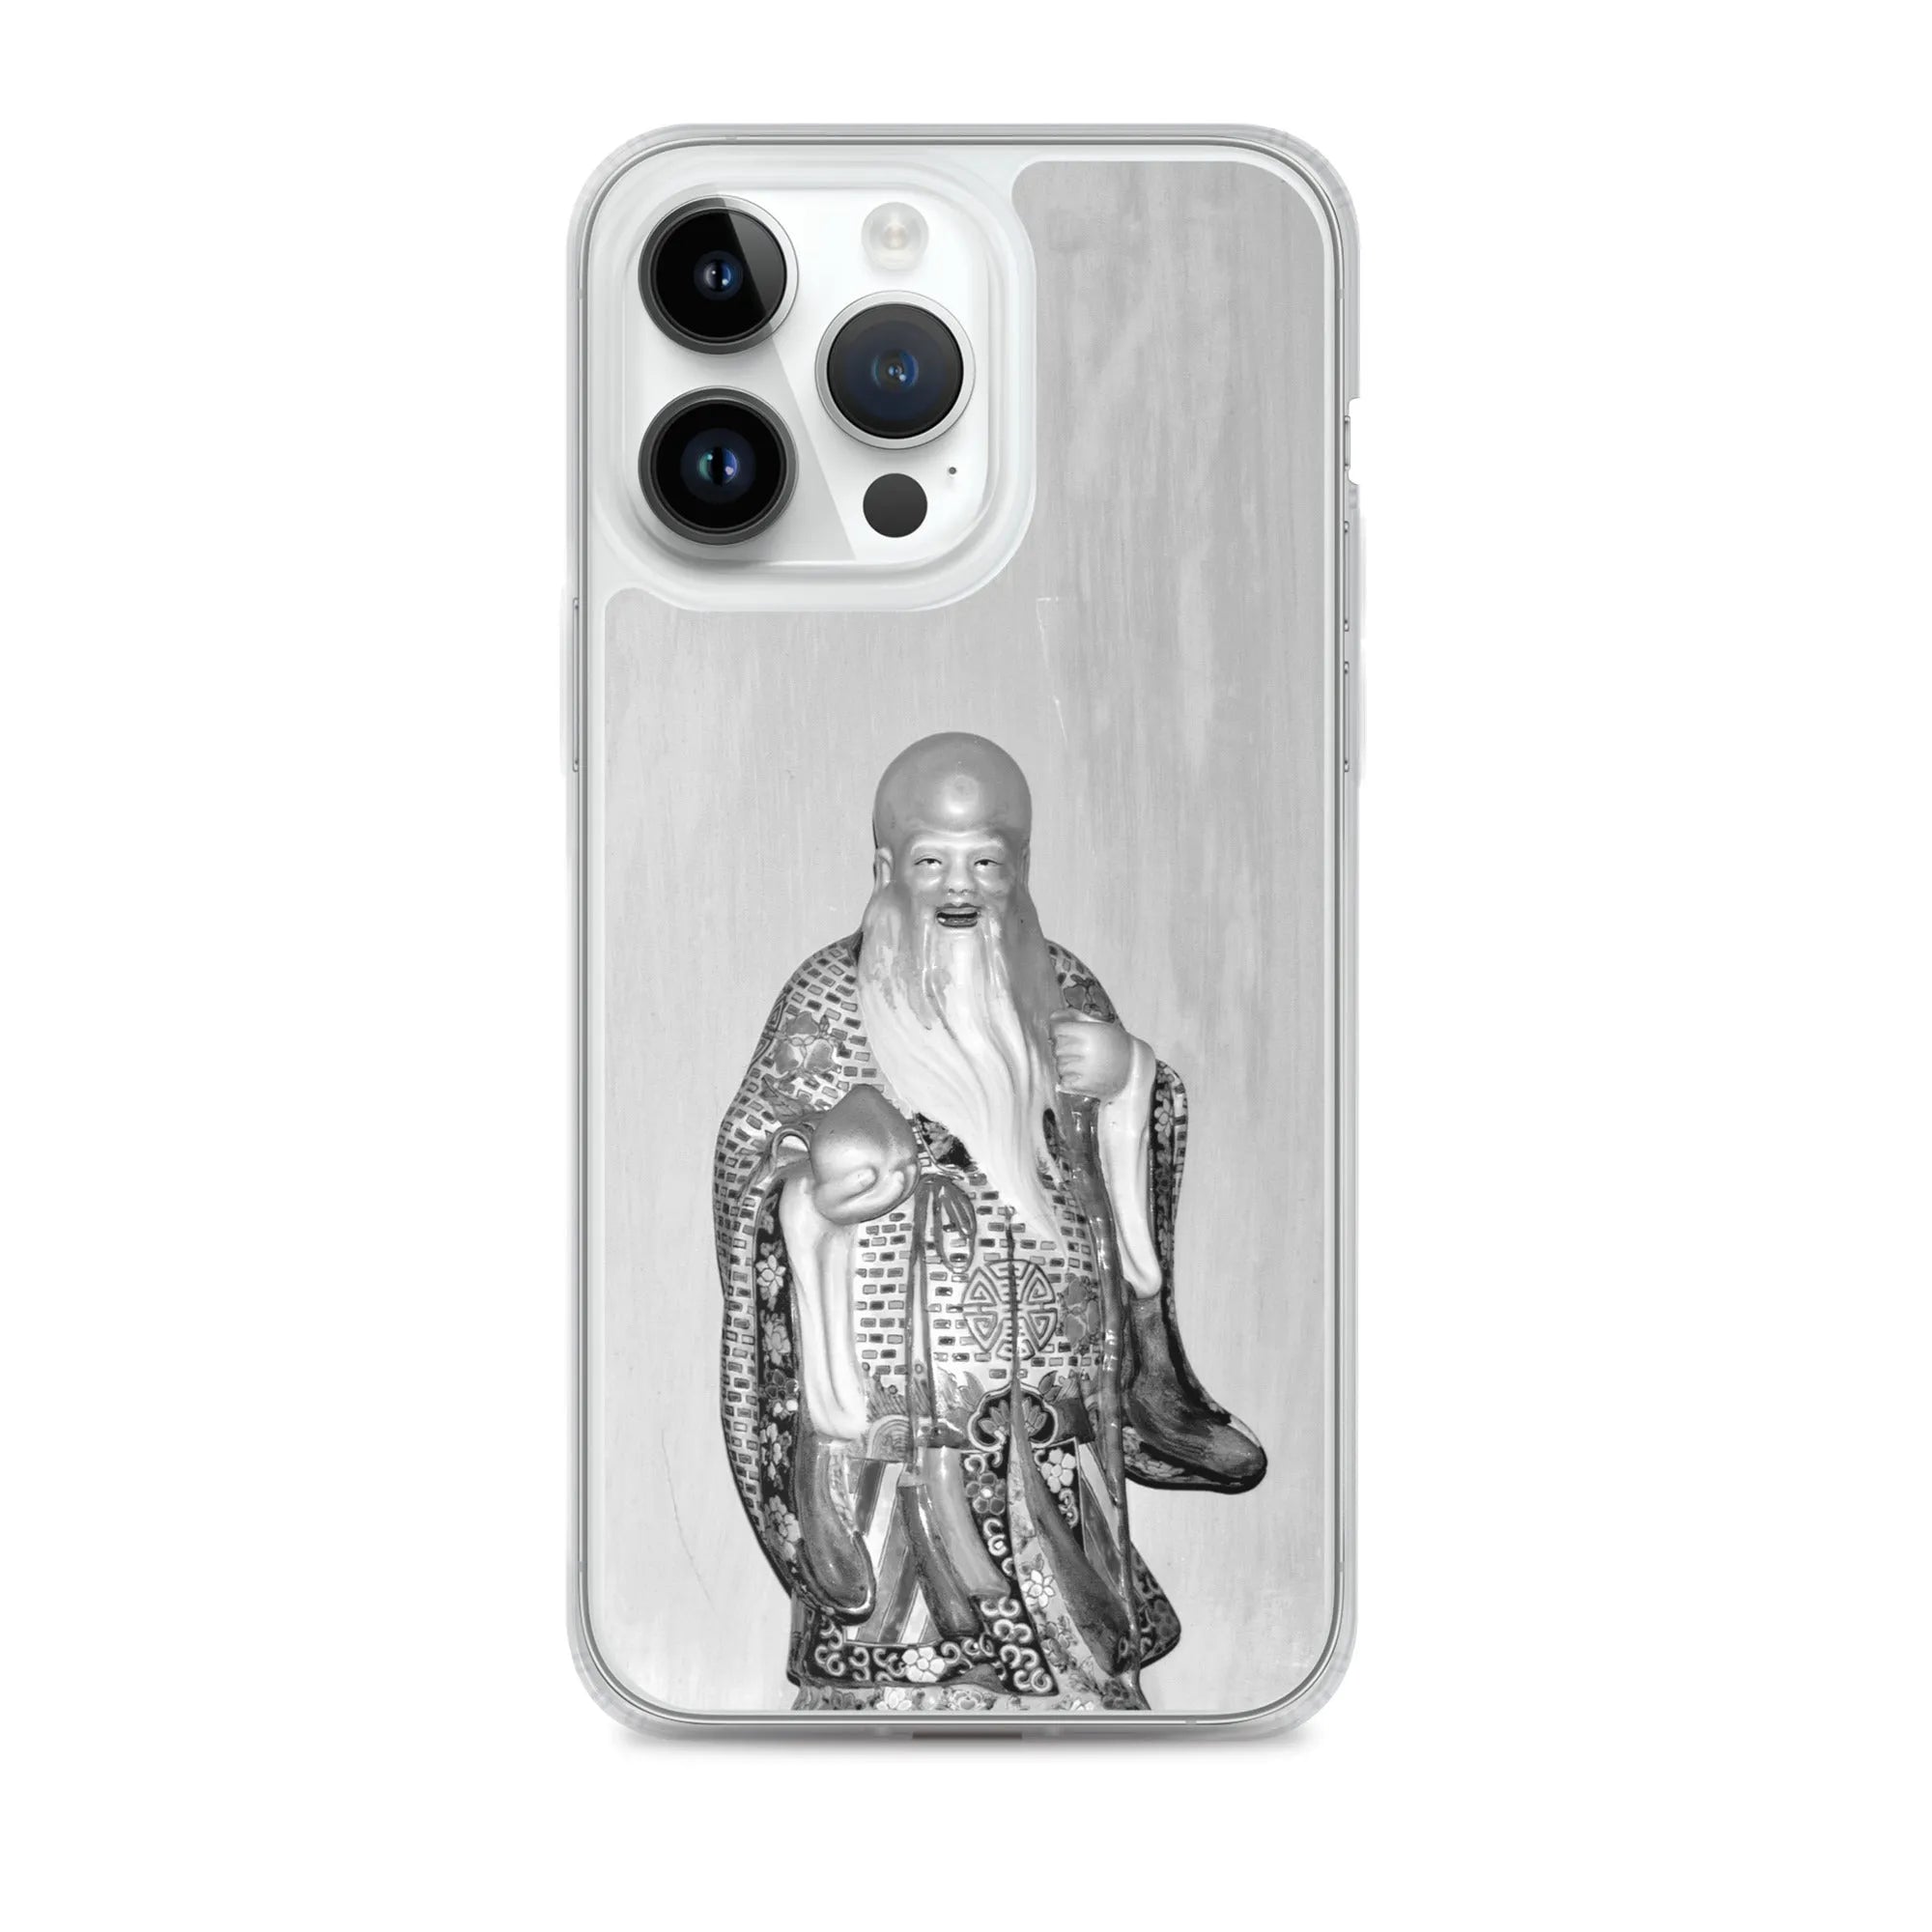 Flying Solo - Designer Travels Art Iphone Case - Black And White - Iphone 14 Pro Max - Mobile Phone Cases - Aesthetic